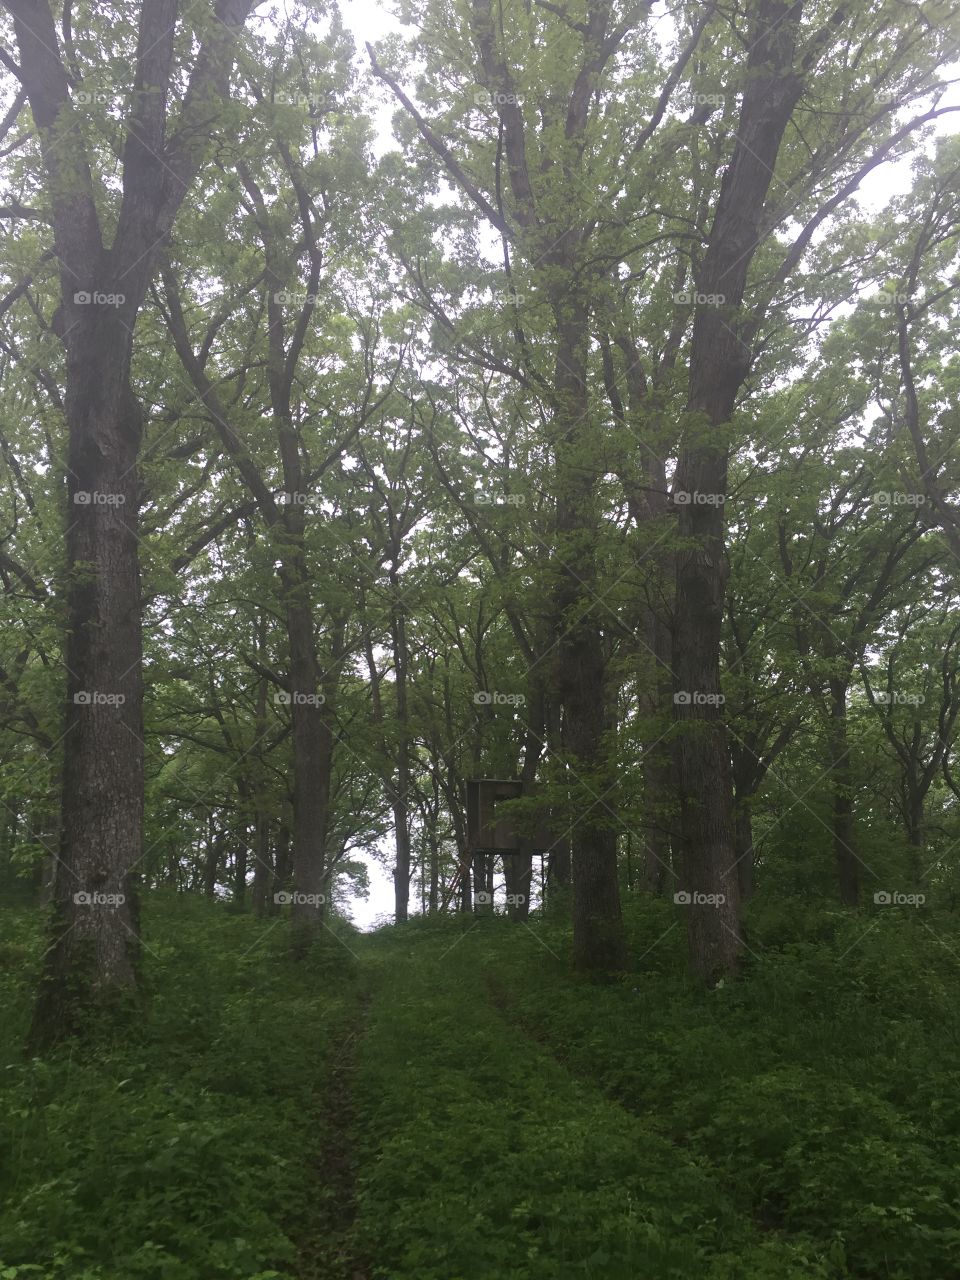 An overgrown hiking trail in an Iowa forest